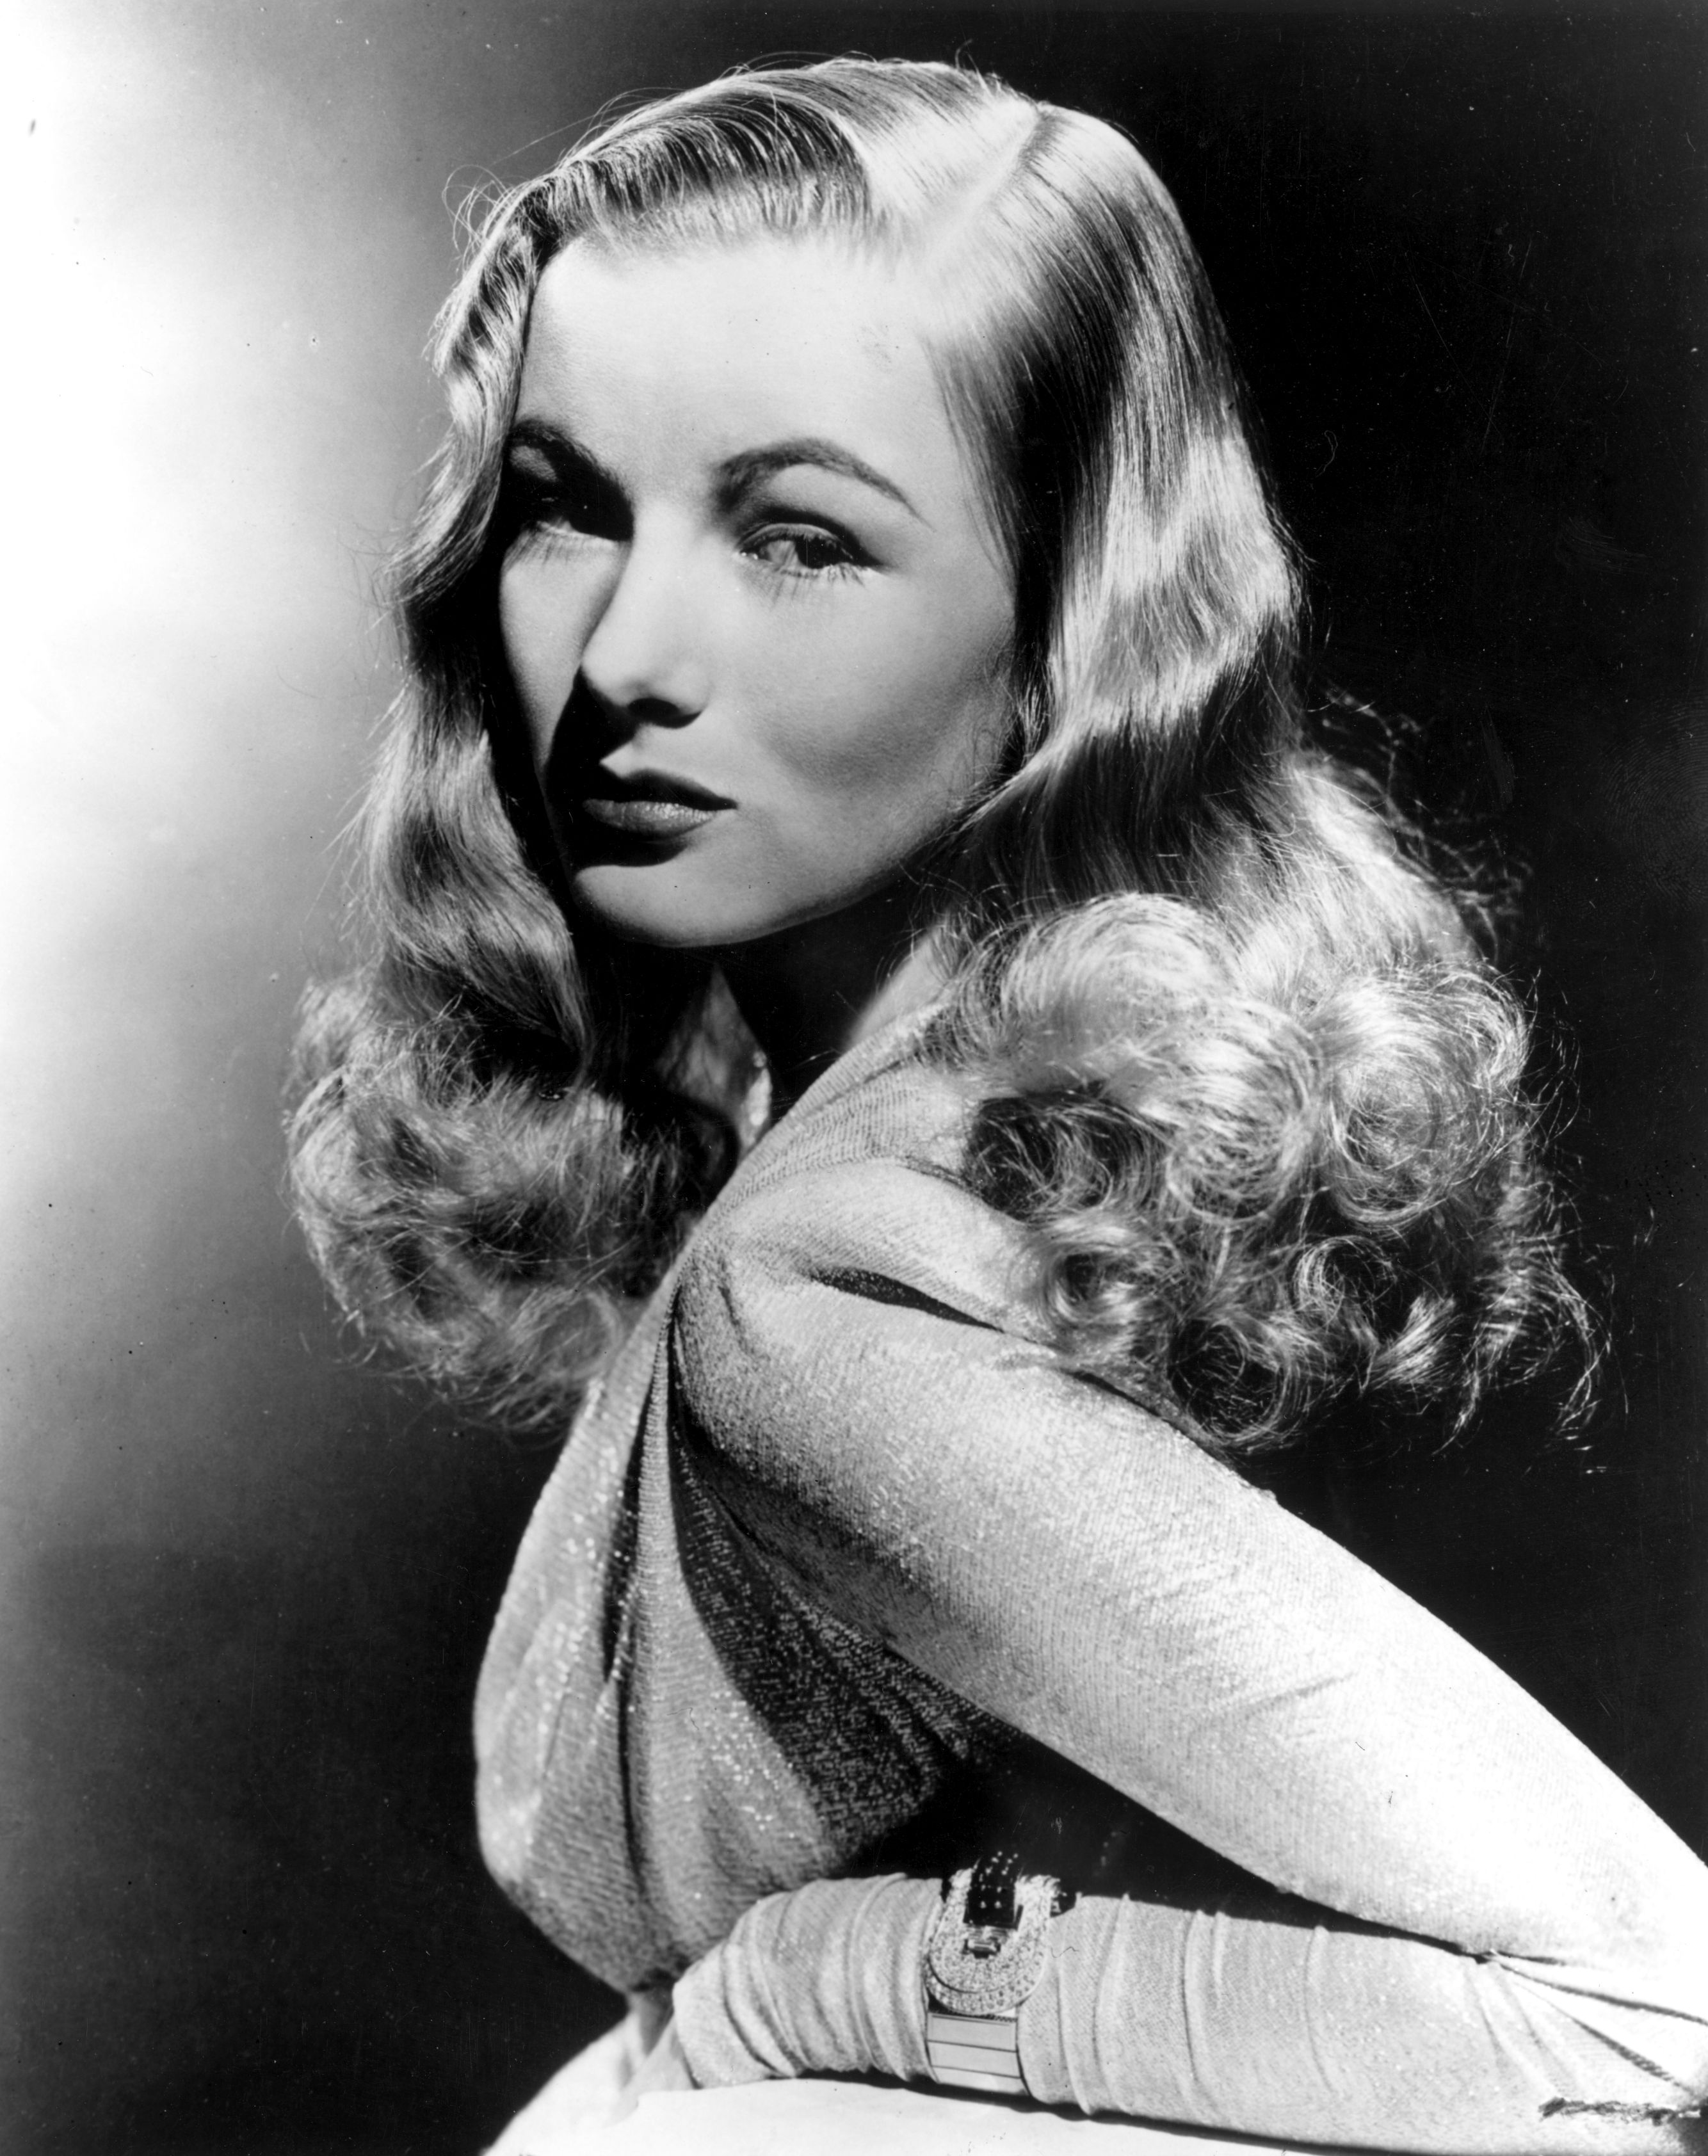 A portrait of the Glamorous actress Veronica Lake on January 01, 1945 | Photo: Getty Images